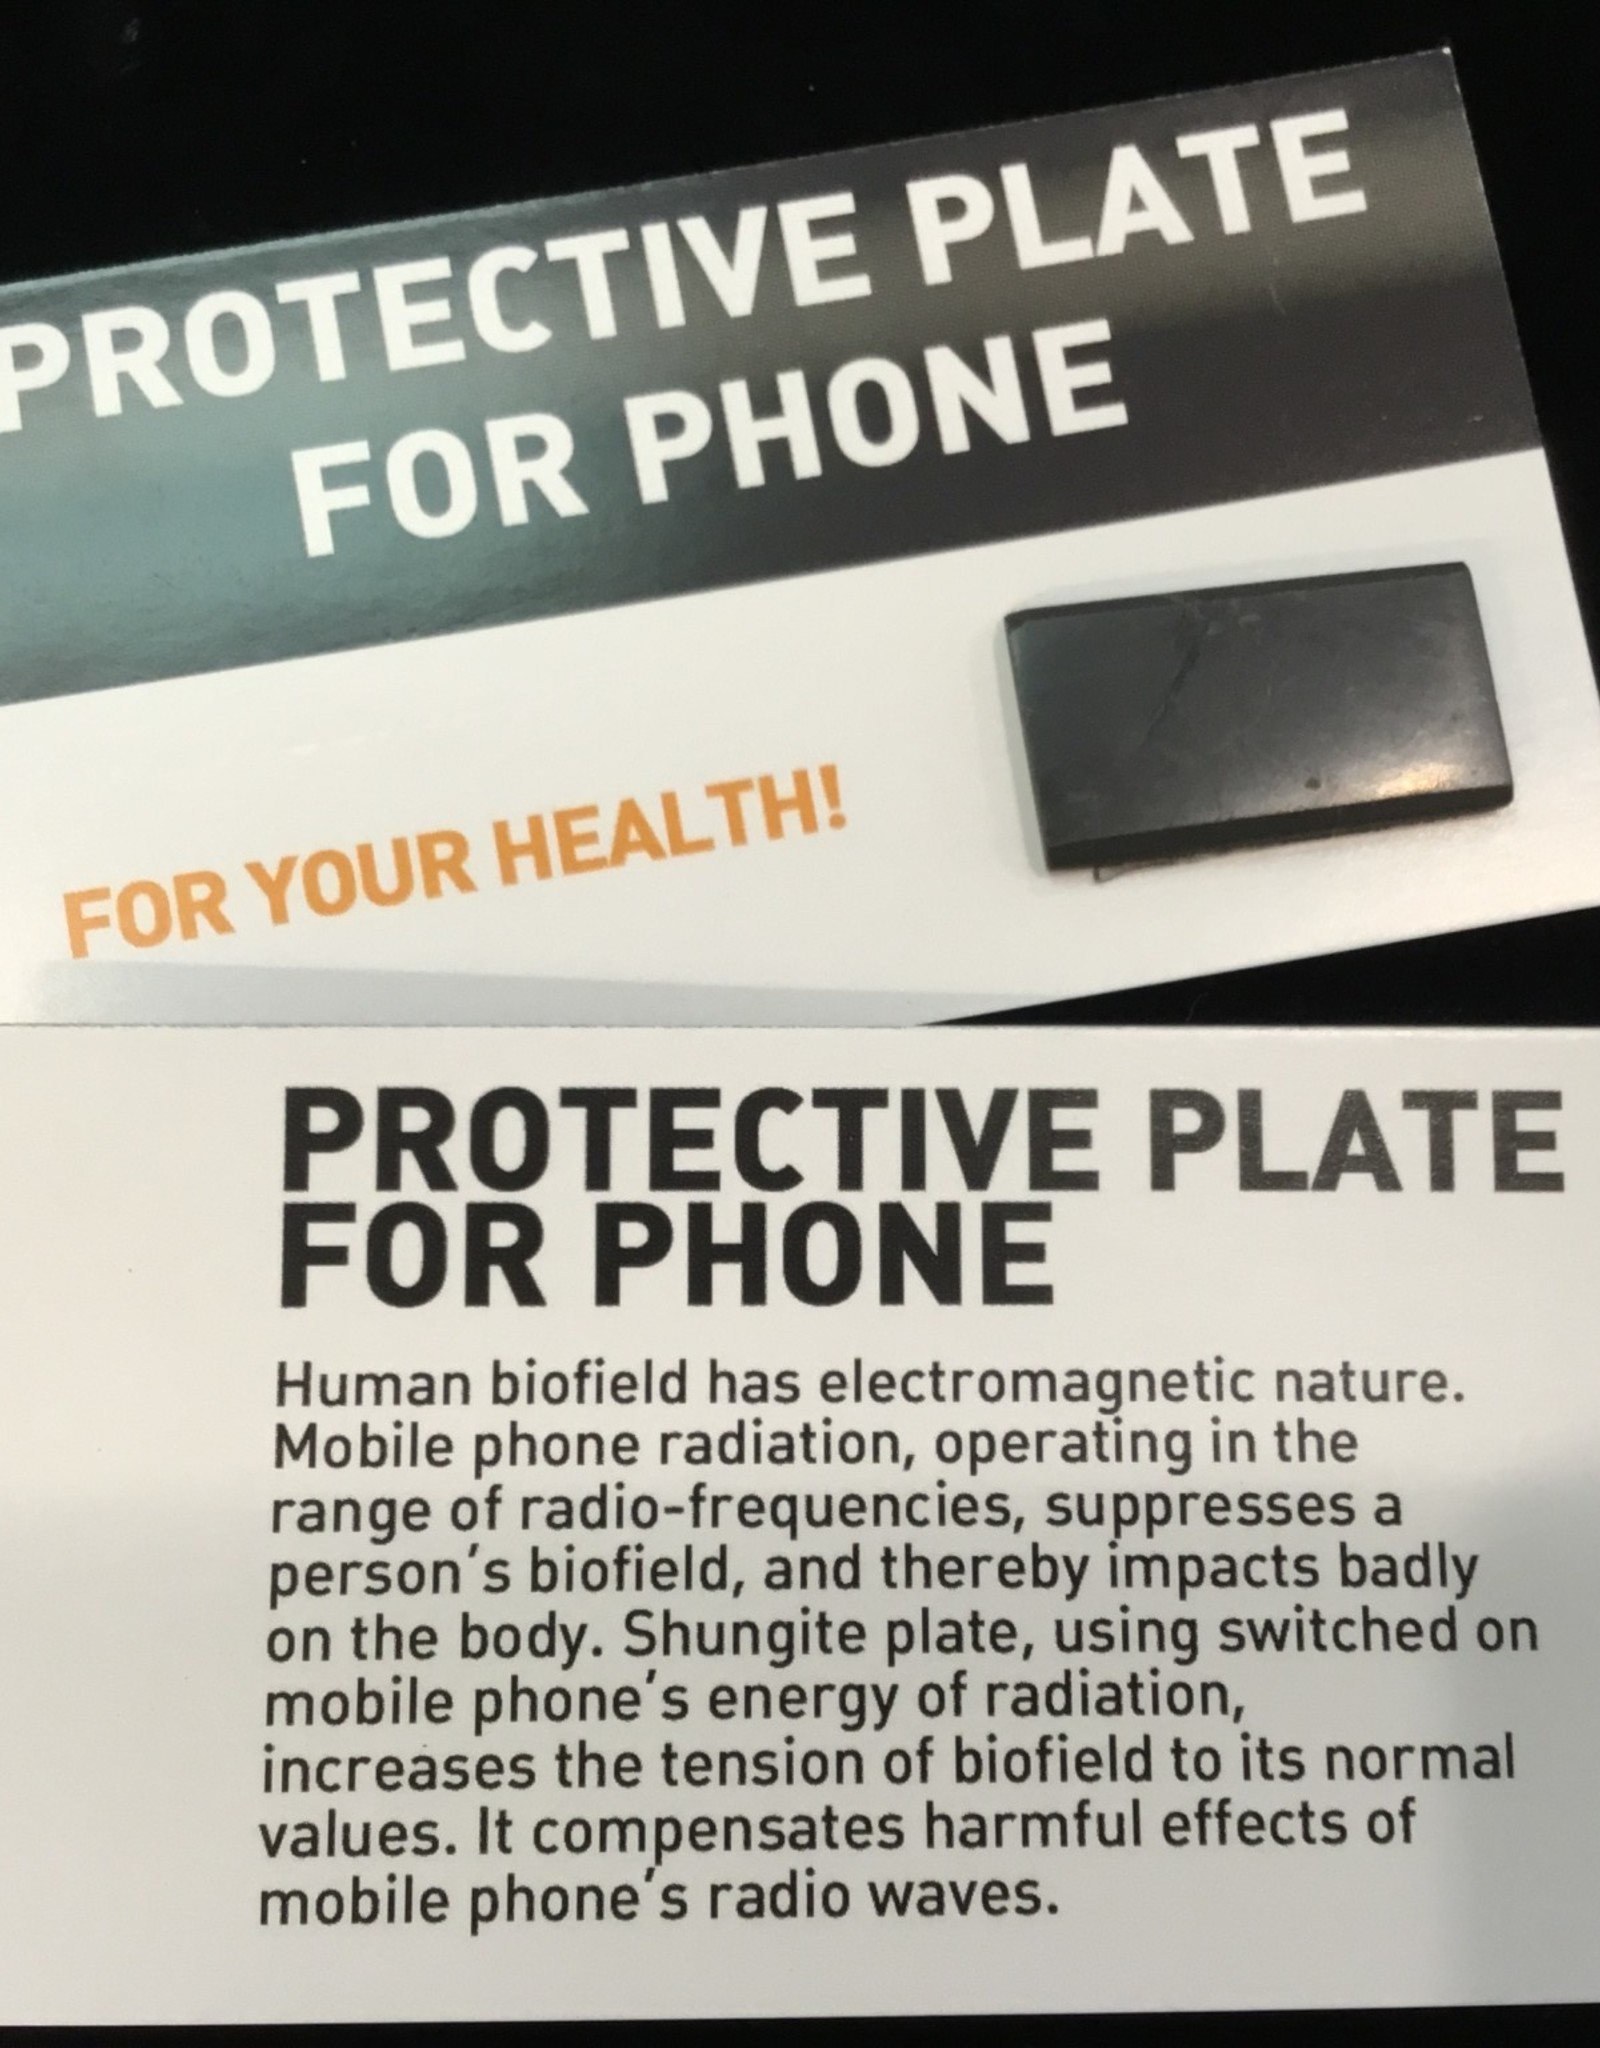 Shungite Protective Plate, for cell phone